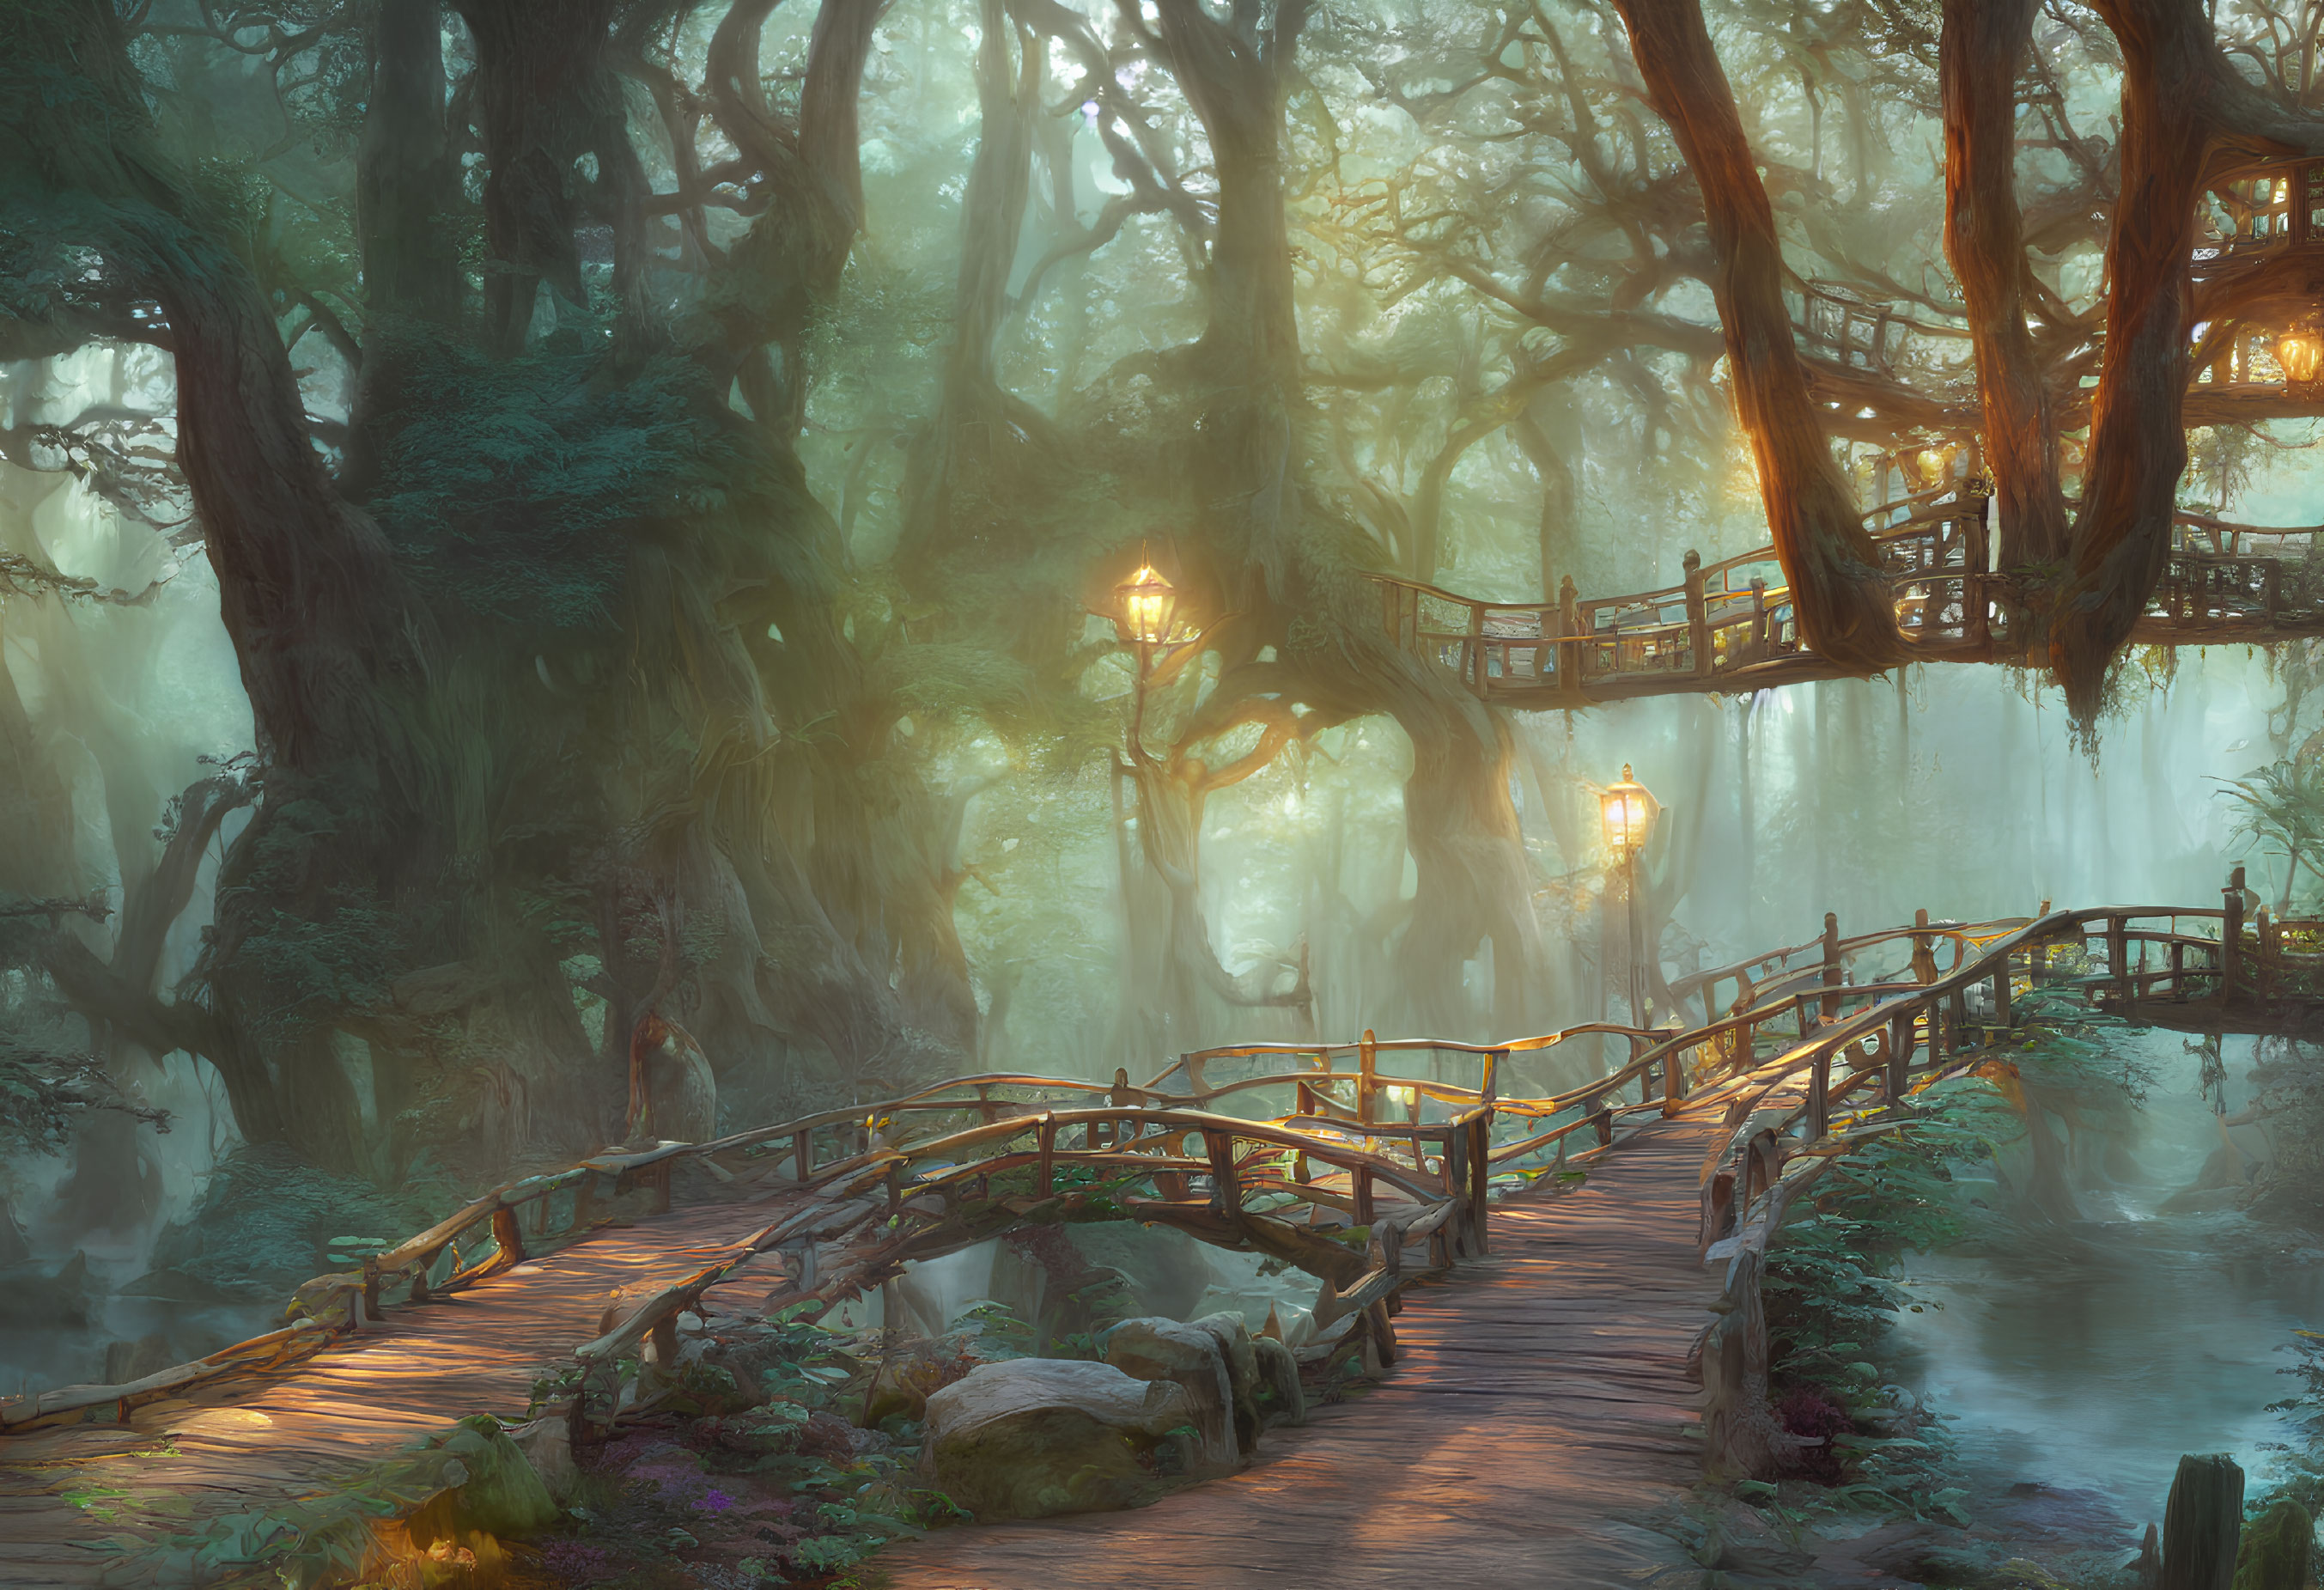 Mystical forest scene with wooden bridge, ancient trees, and glowing lanterns